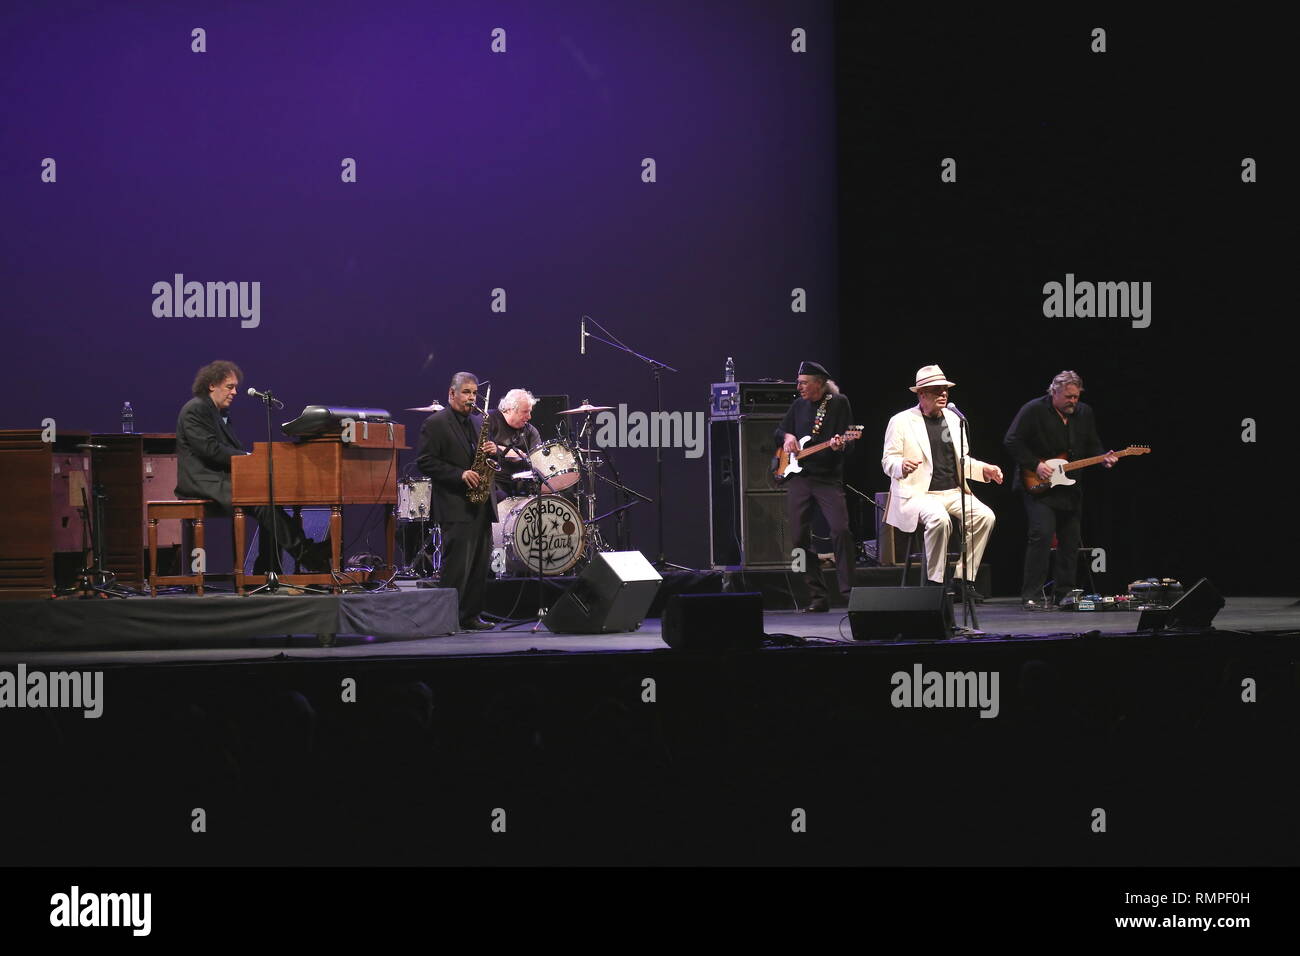 https://c8.alamy.com/comp/RMPF0H/singer-and-band-leader-lefty-foster-is-shown-performing-with-the-shaboo-all-stars-during-a-live-concert-appearance-RMPF0H.jpg